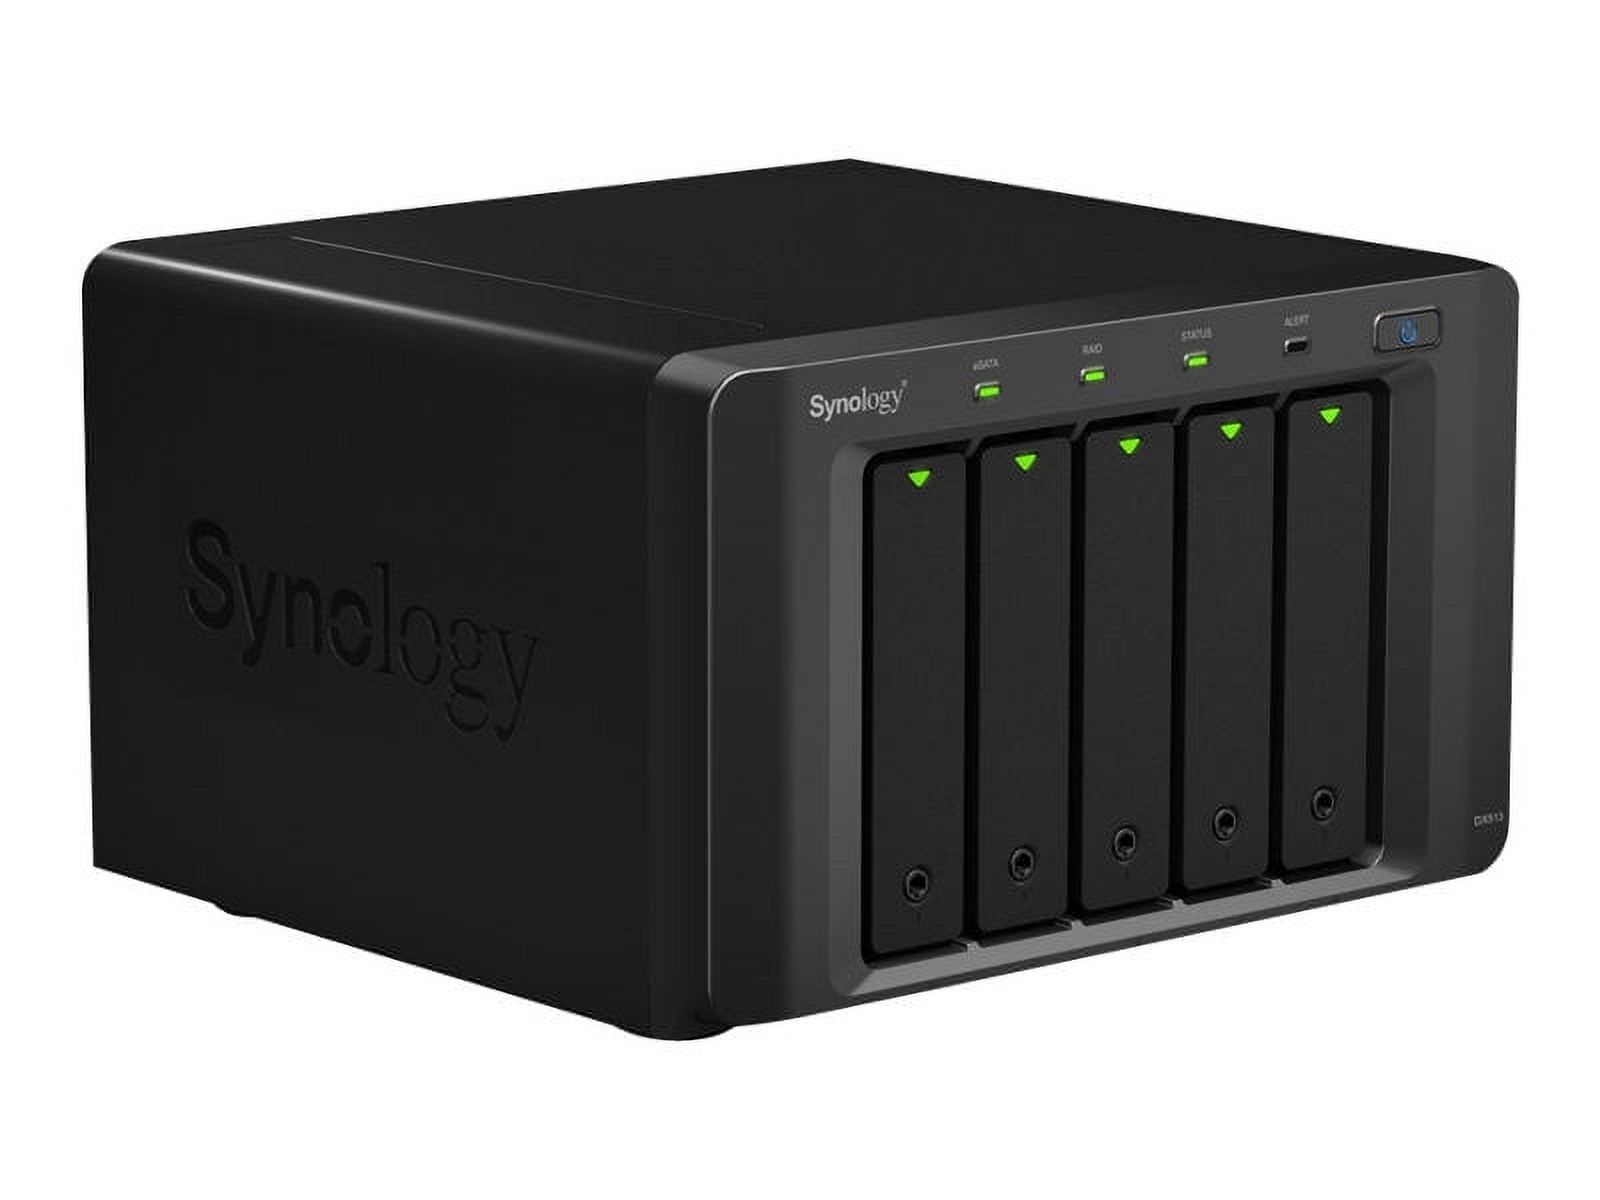 Synology DX513 Expansion Unit For Increasing Capacity of The Synology DiskStation - image 3 of 4